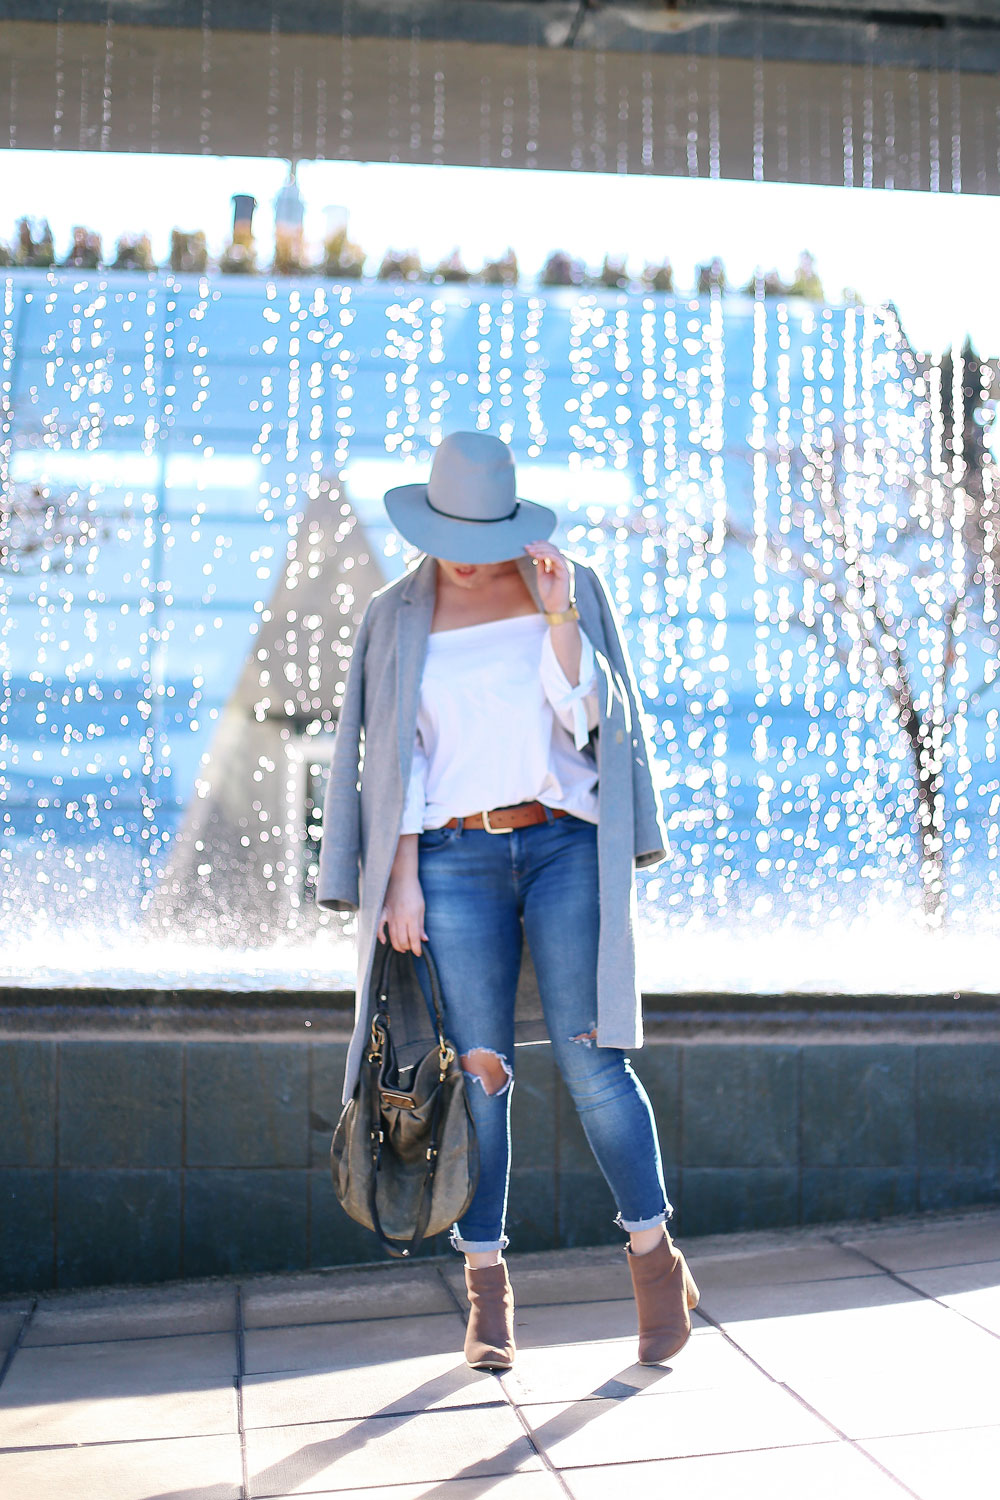 Aritzia off the shoulder white top, Aritzia grey wool coat, Mavi skinny jeans, Marc Jacobs olive green bag, Urban Outfitters suede ankle boots, Aritzia grey wool fedora, Cluse gold mesh watch and Celine sunglasses - how to style off the shoulder tops